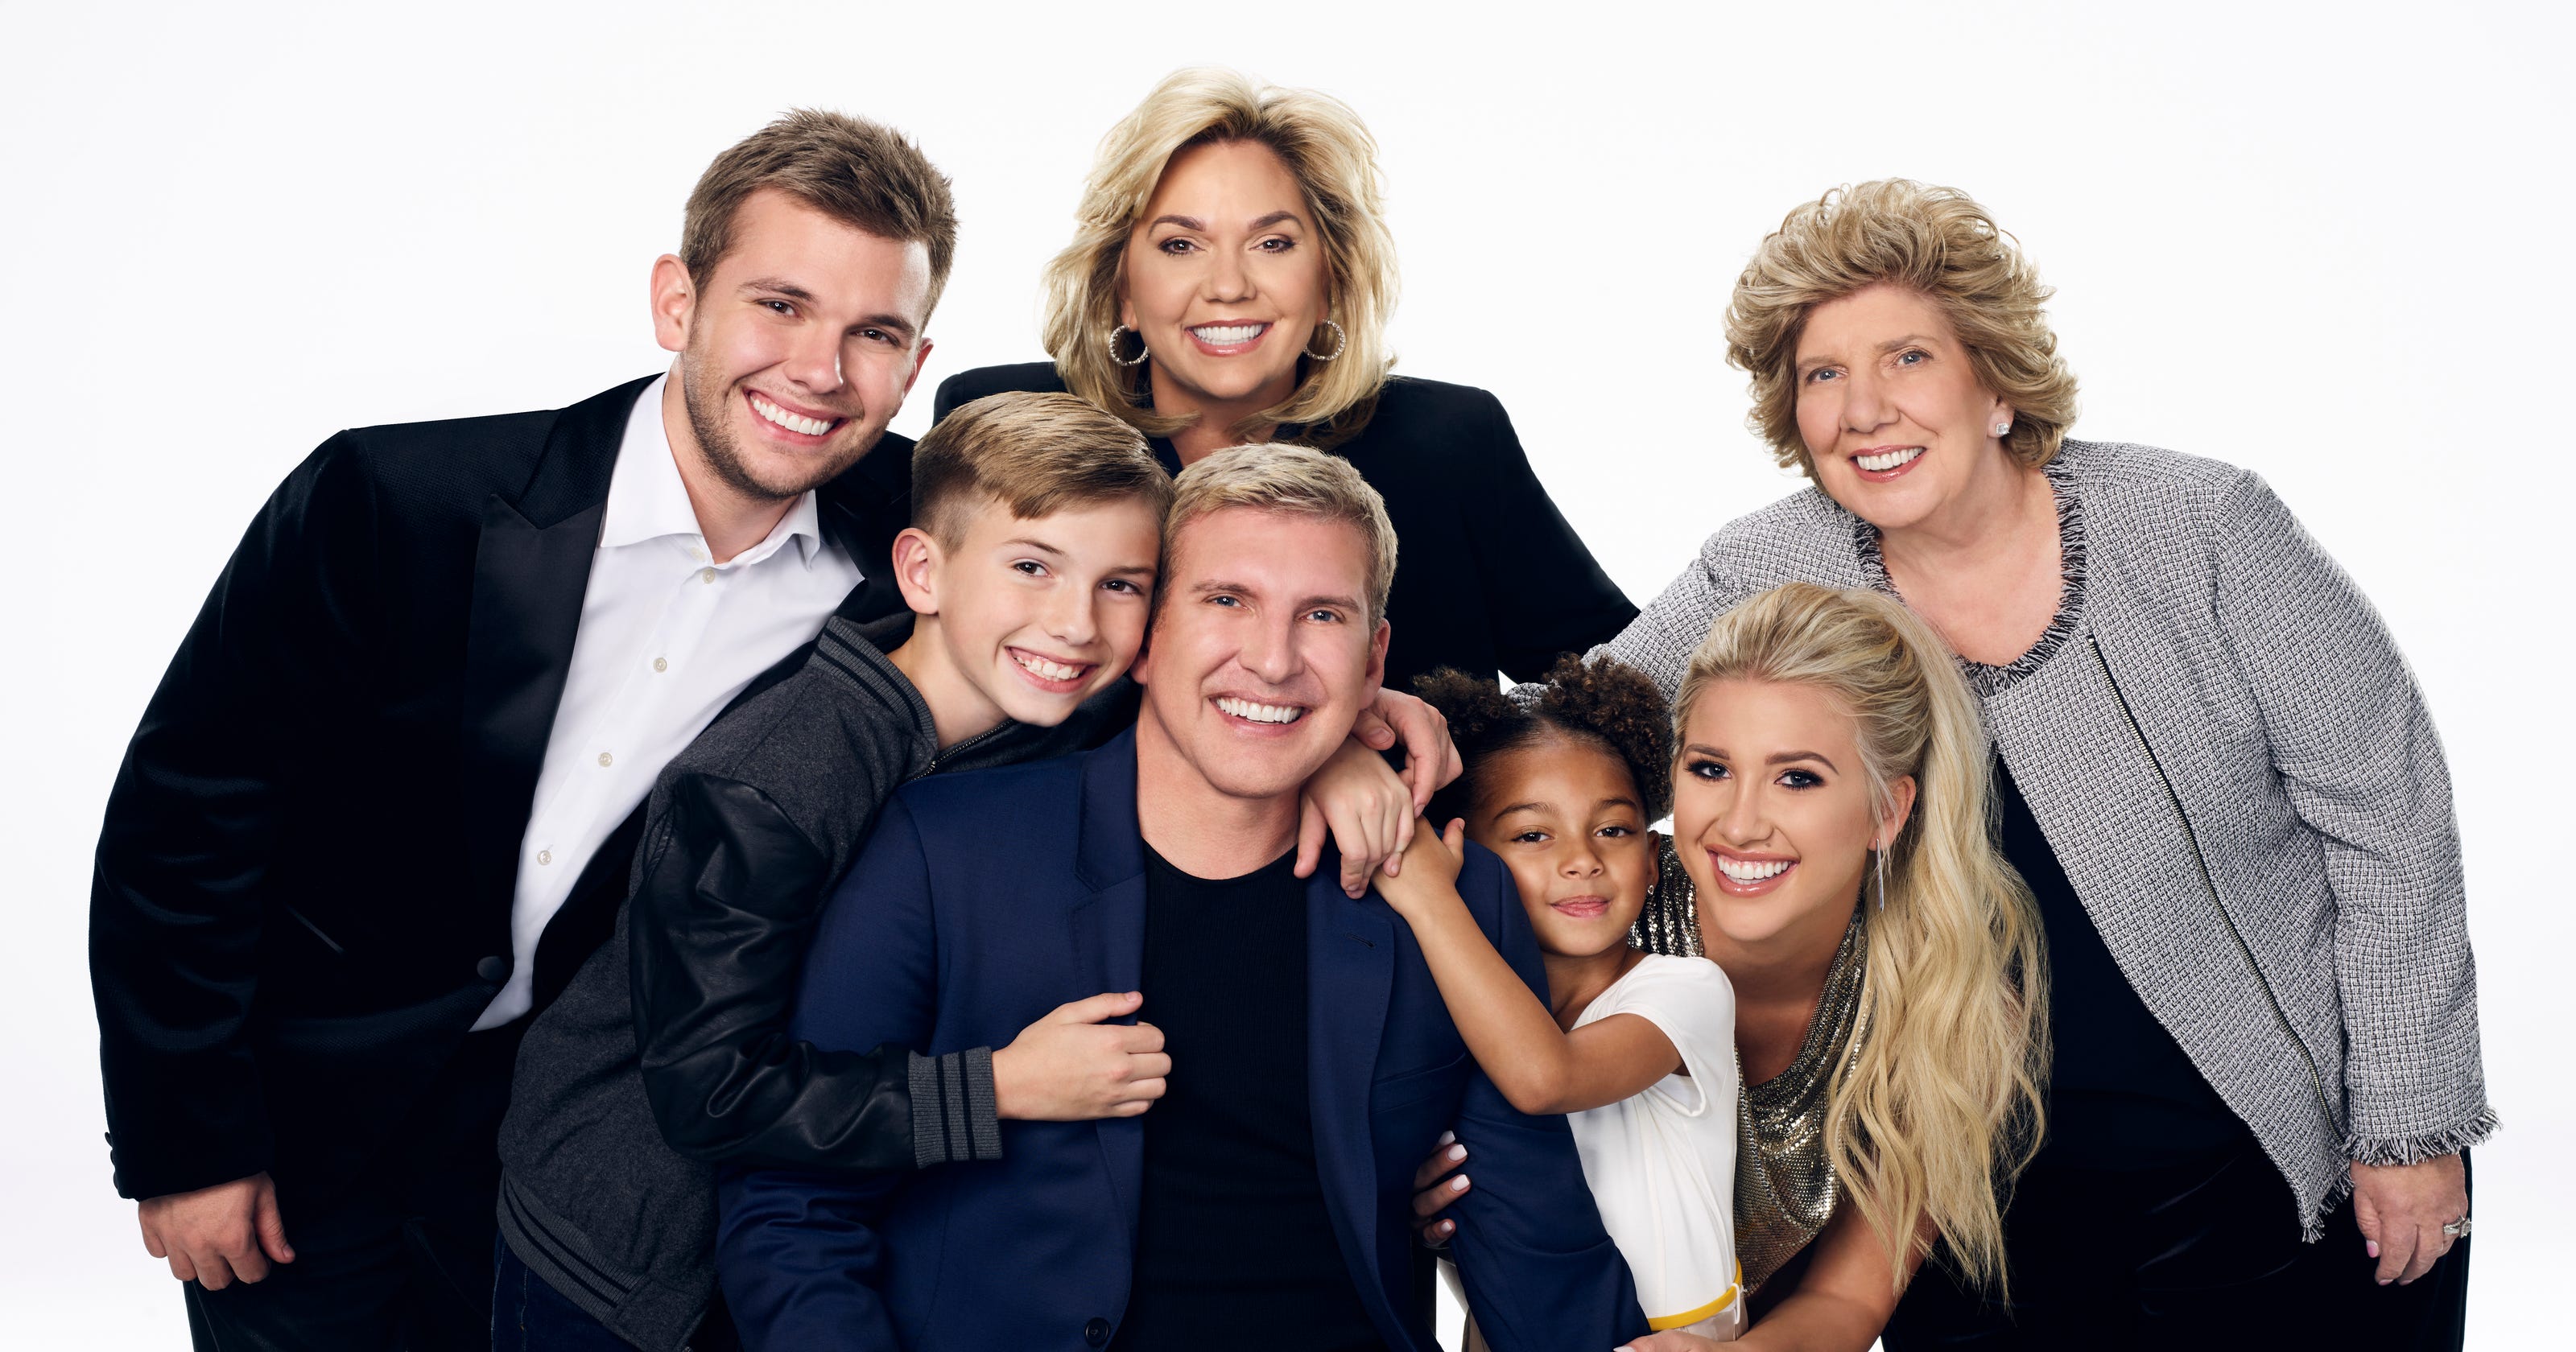 Chrisley Knows Best Season 6 finale: 4 things to know